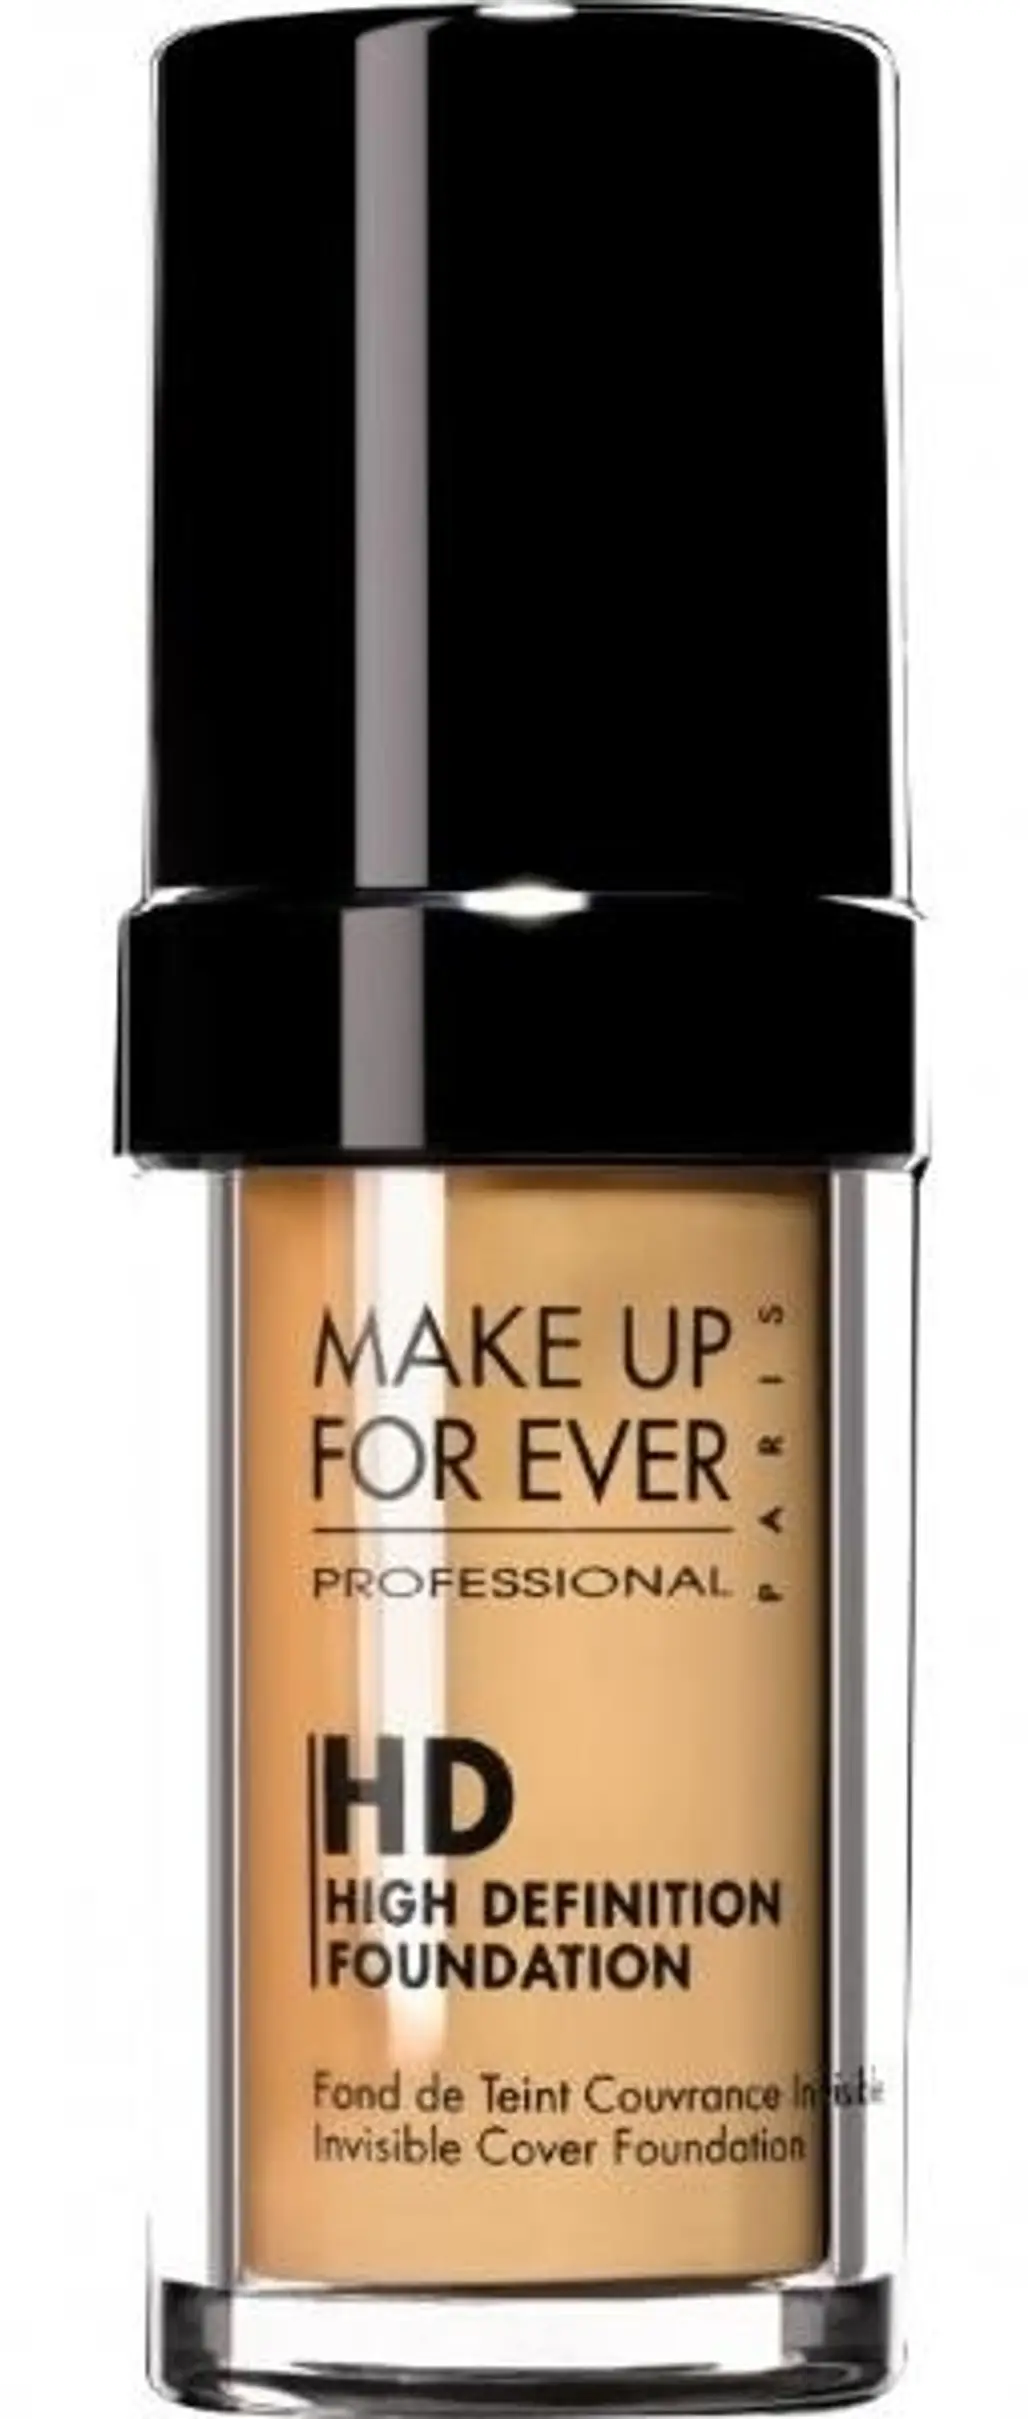 Make up for Ever – HD High Definition Foundation